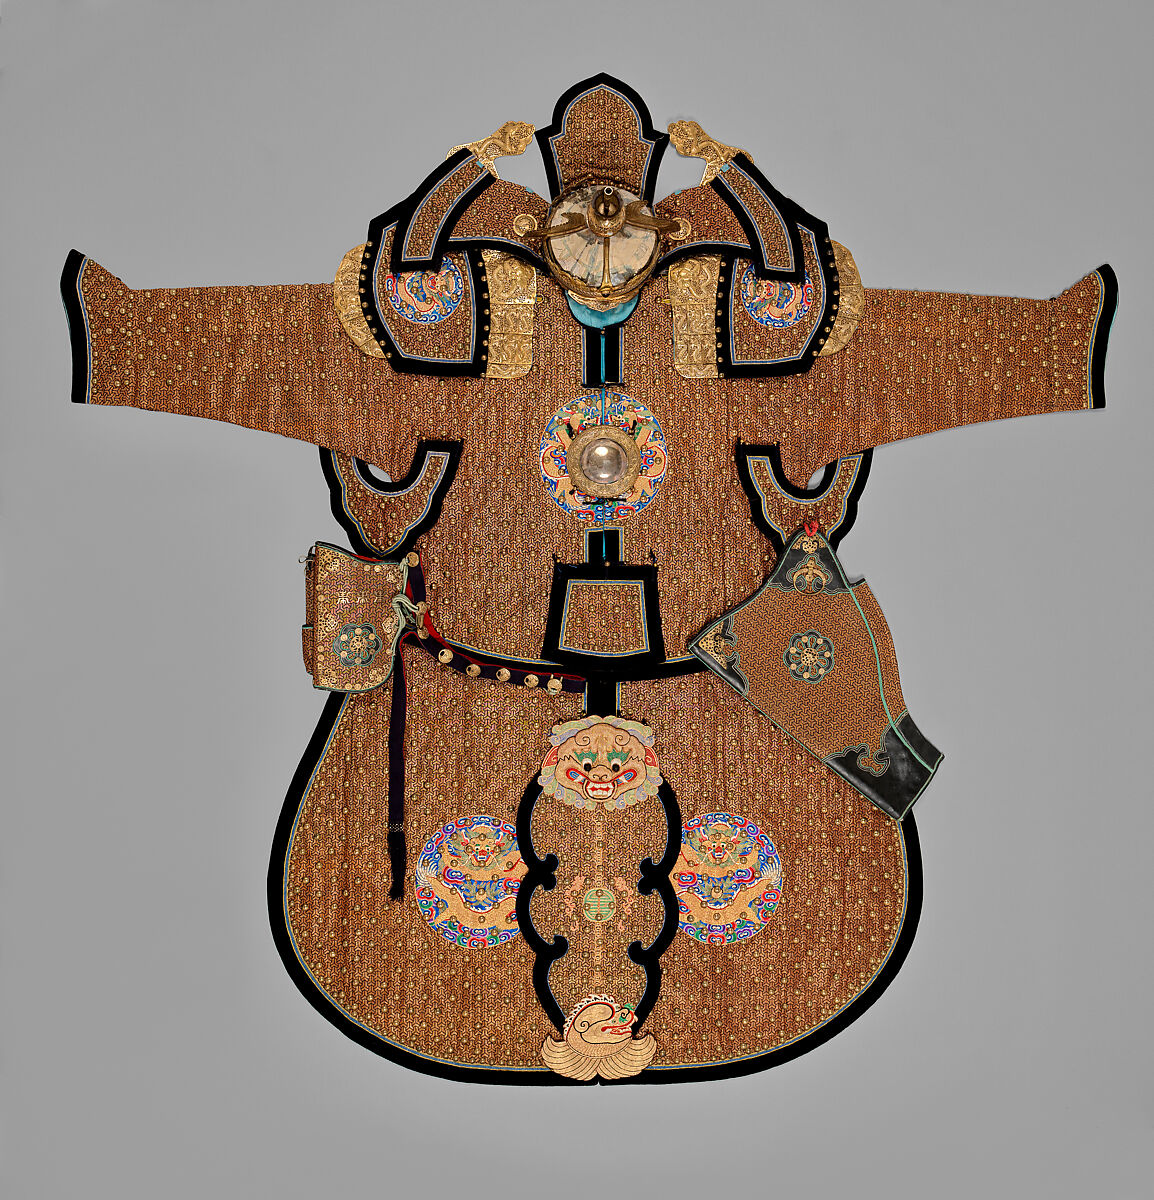 Armor with Archery Equipment and Box, Textile (silk), copper alloy, steel, gold, silver, wood, leather, lacquer, paper, pigment, Chinese 